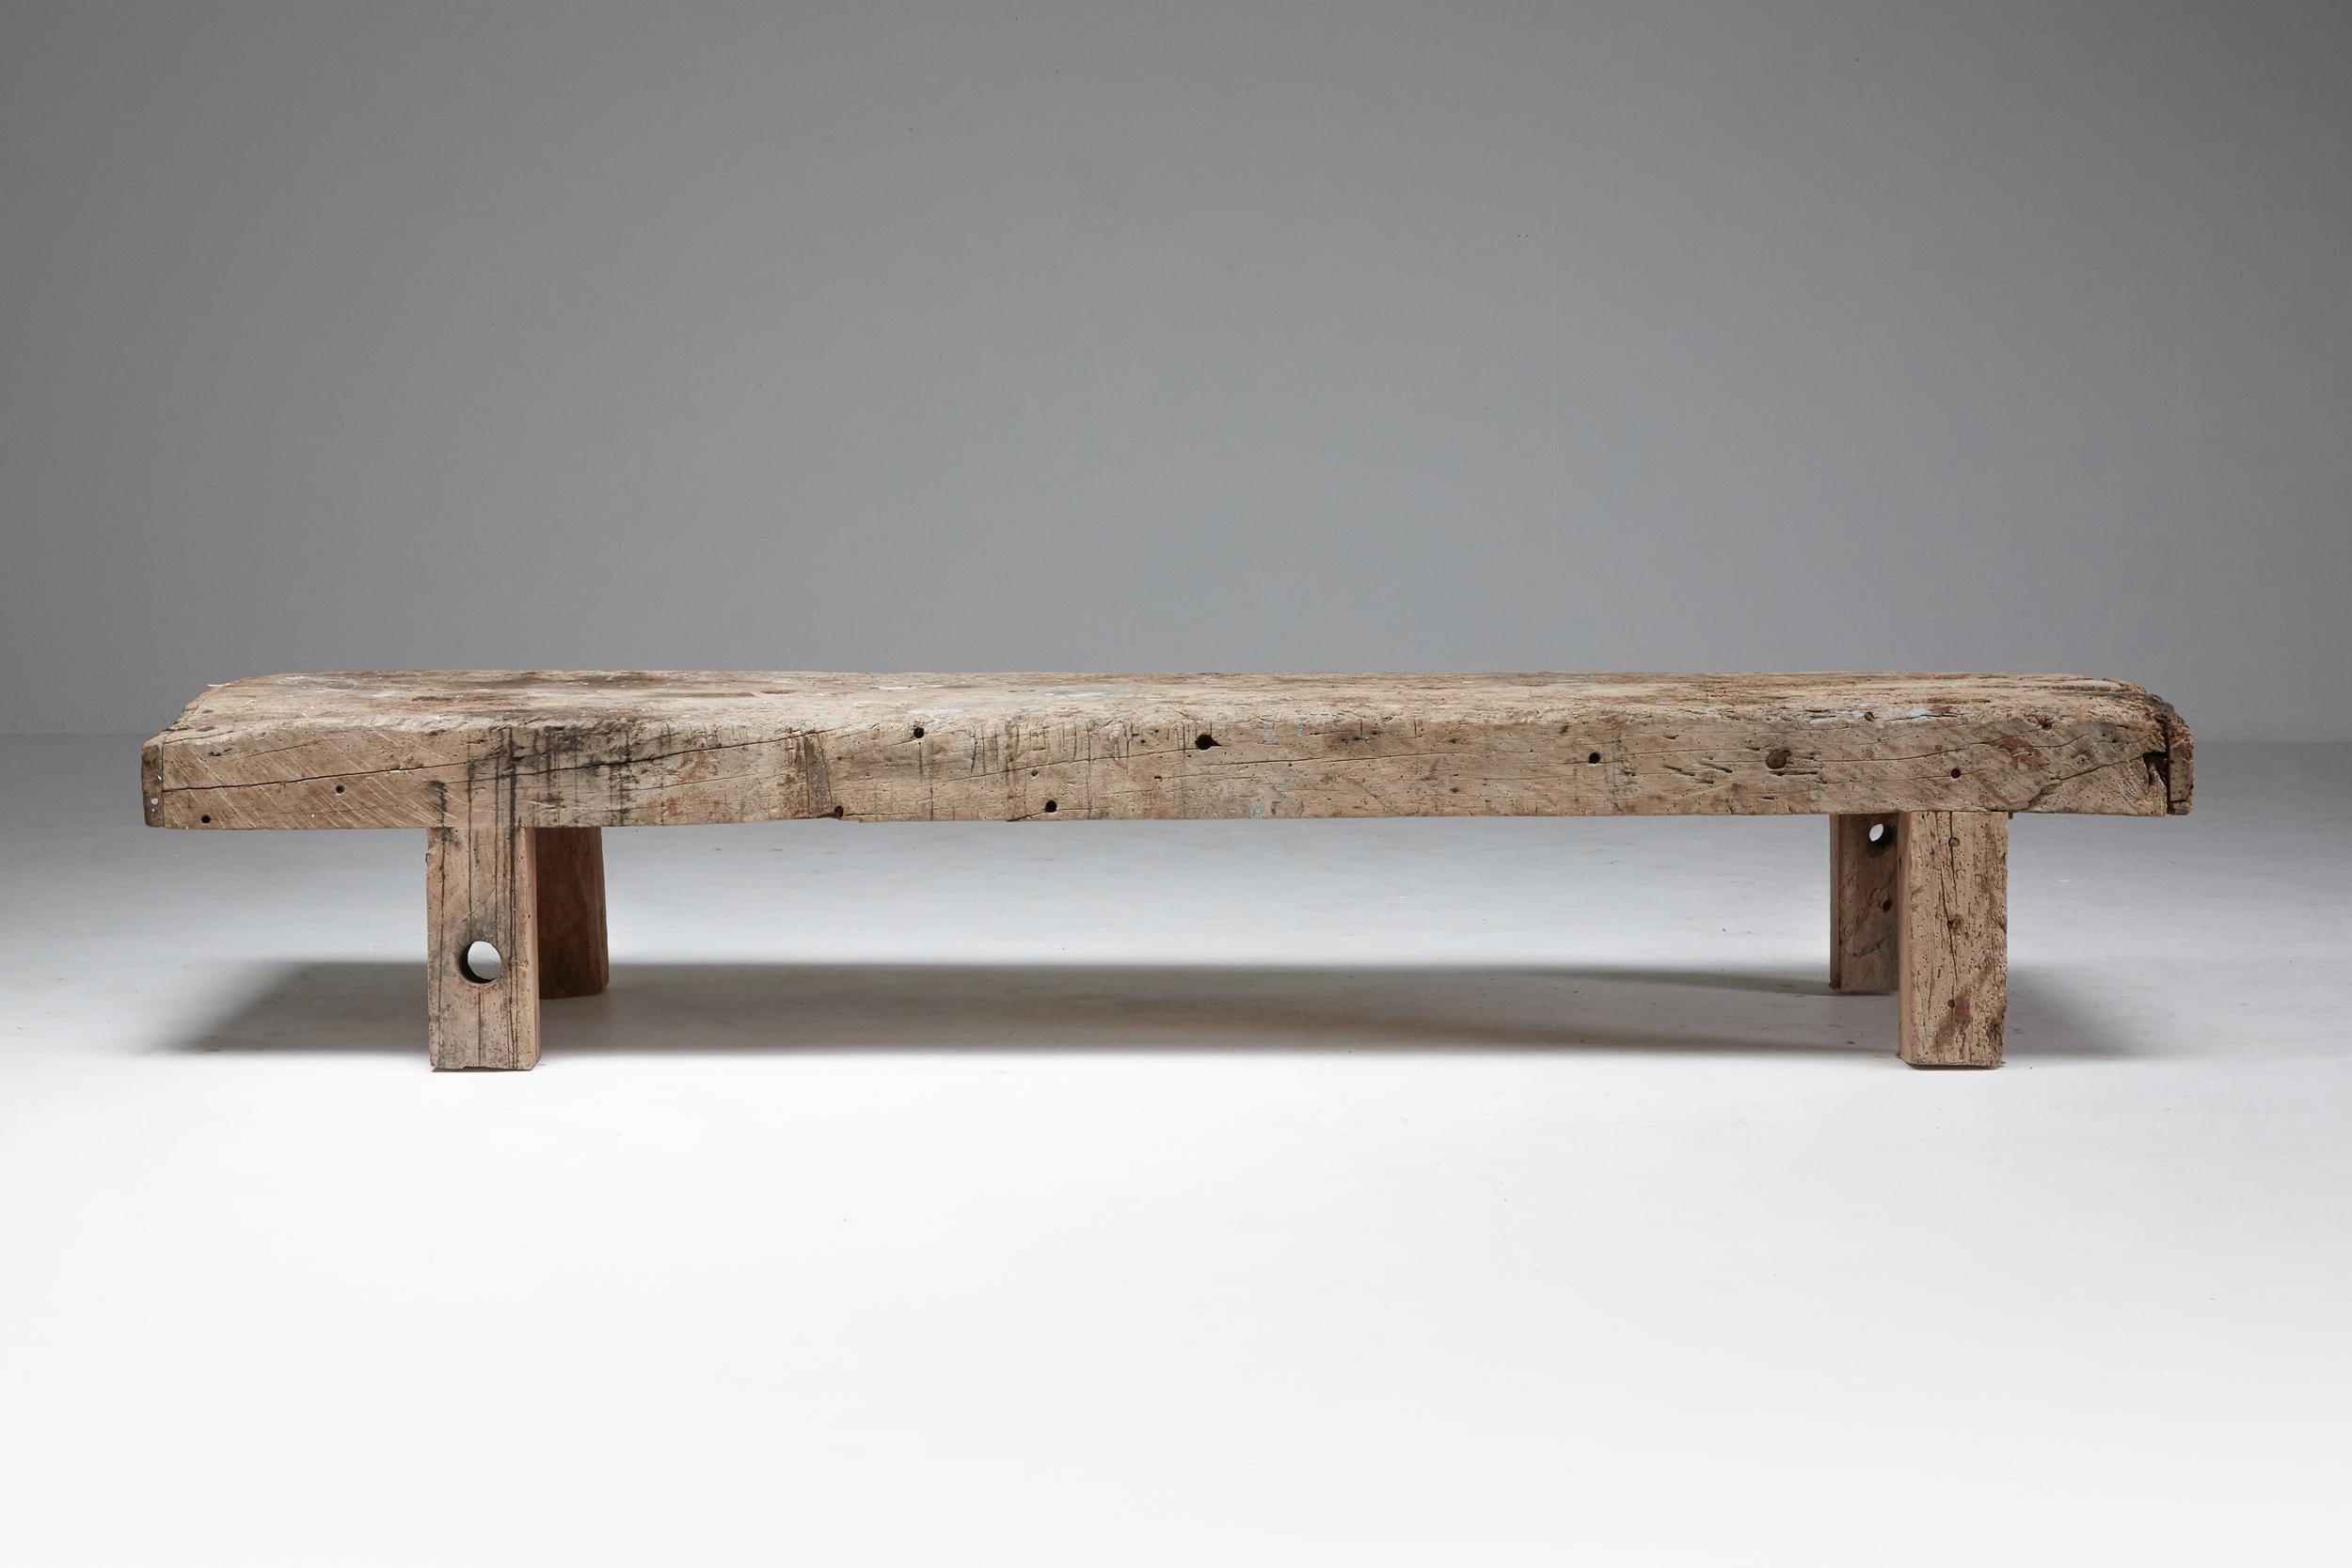 Wabi sabi, zen, rustic, primitive, coffee table, bench, France

Rustic piece full of character and patina. The wood has become very pale in color over the years reminiscing of a piece of driftwood or even stone. The wood itself is probably a few